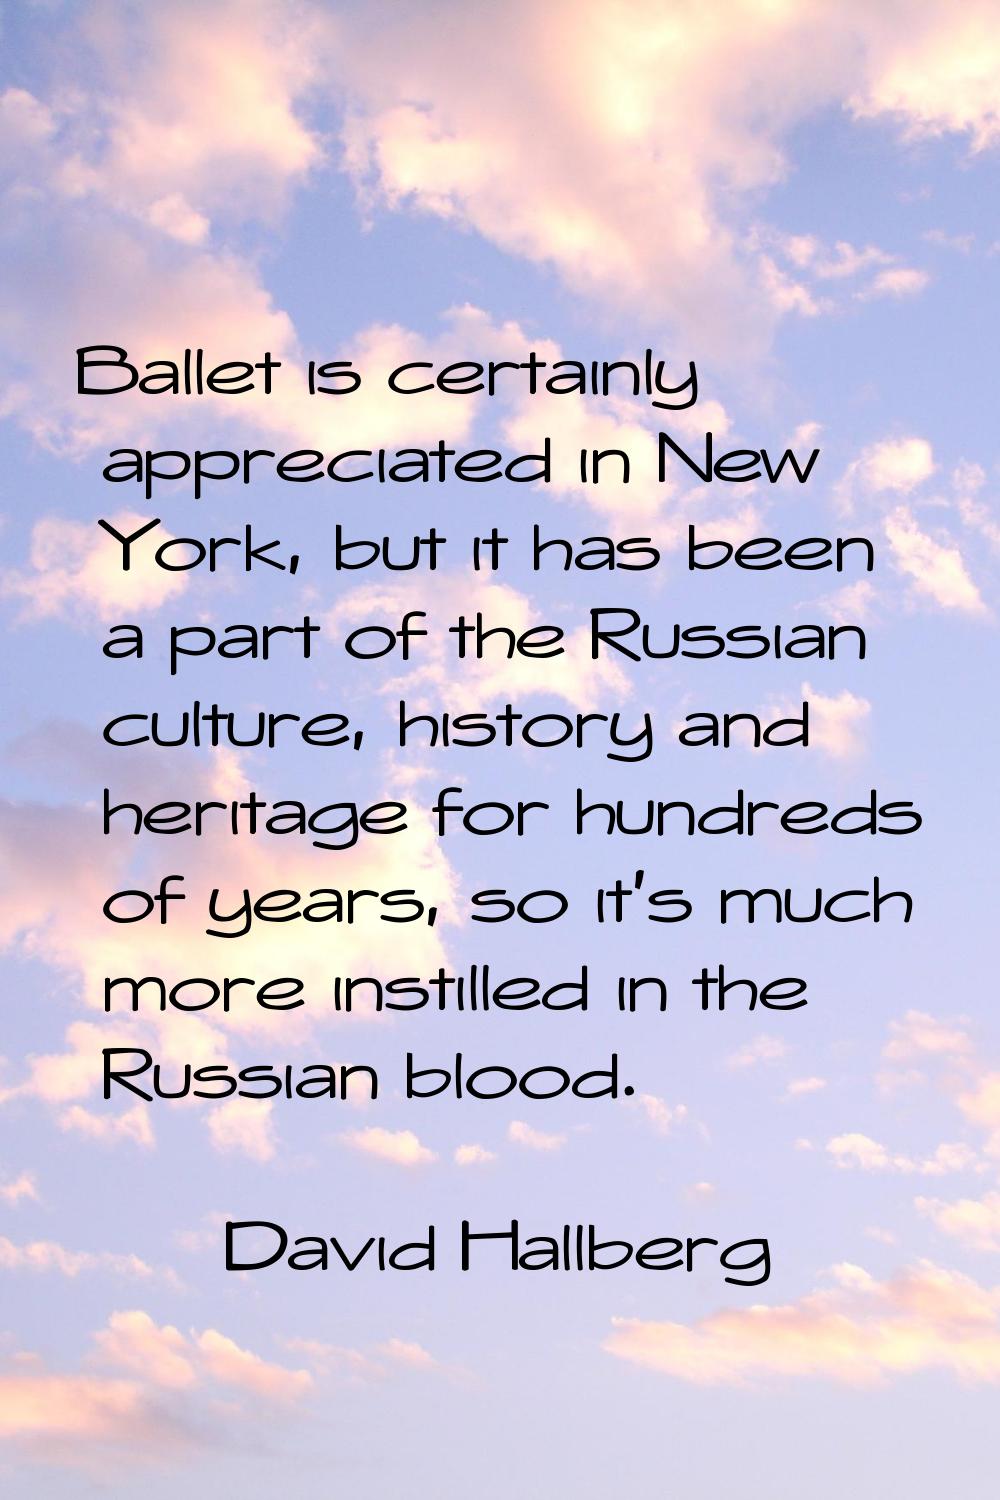 Ballet is certainly appreciated in New York, but it has been a part of the Russian culture, history